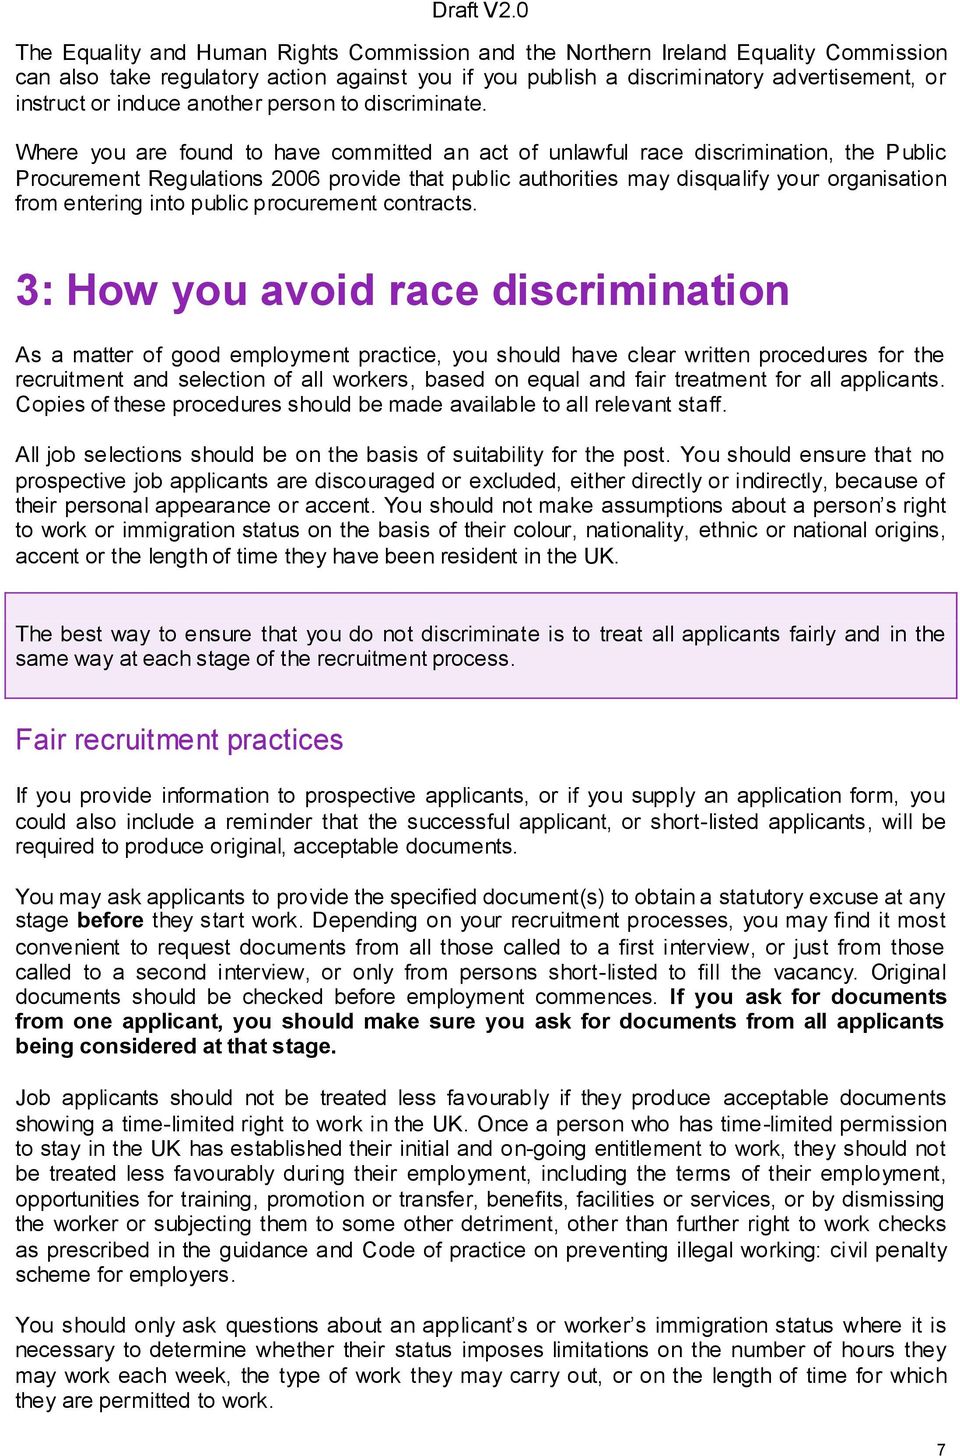 Where you are found to have committed an act of unlawful race discrimination, the Public Procurement Regulations 2006 provide that public authorities may disqualify your organisation from entering